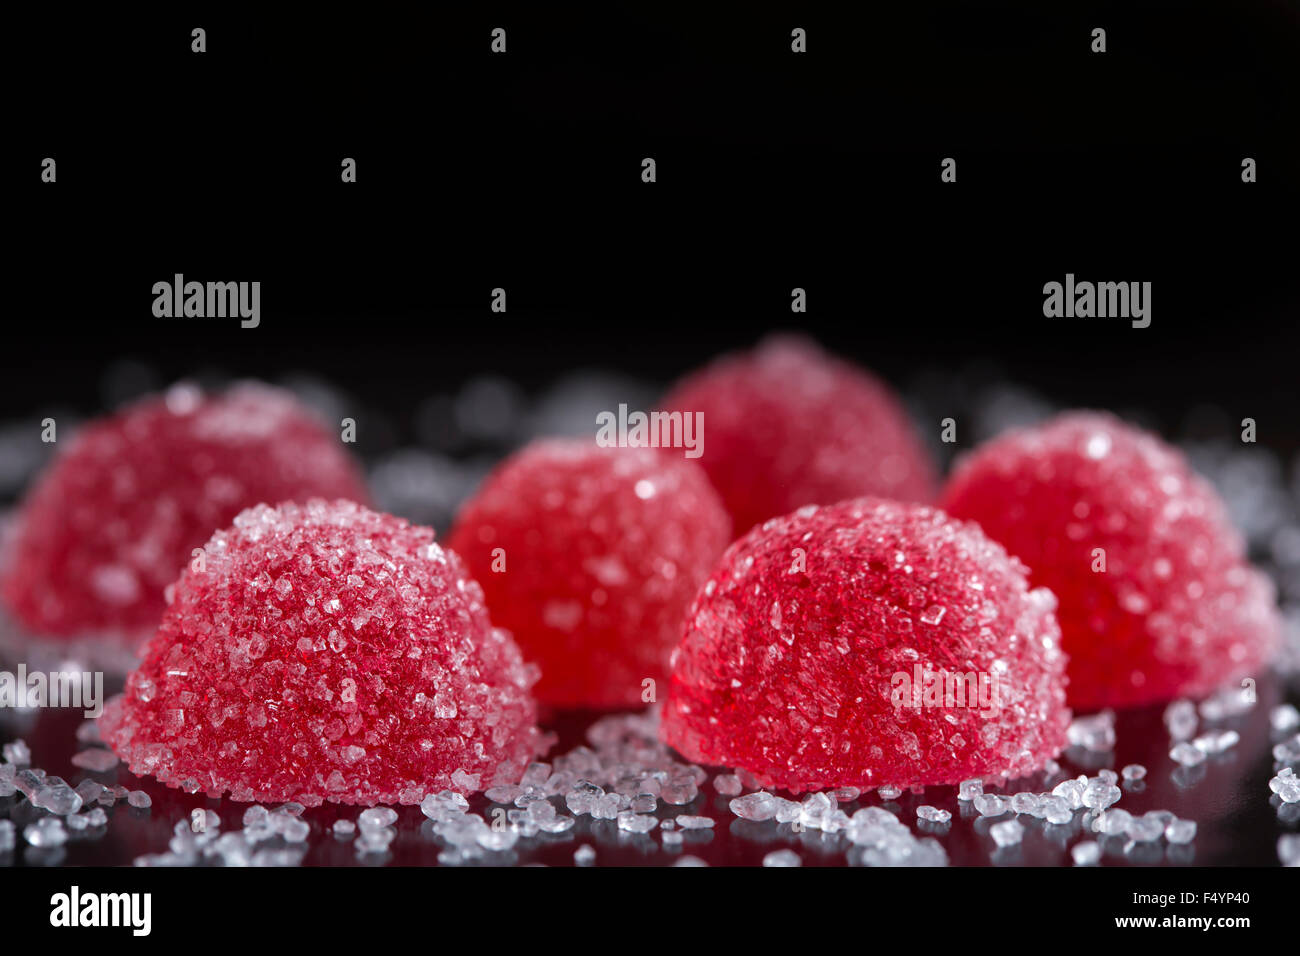 Red jelly candies with white sugar over black background Stock Photo